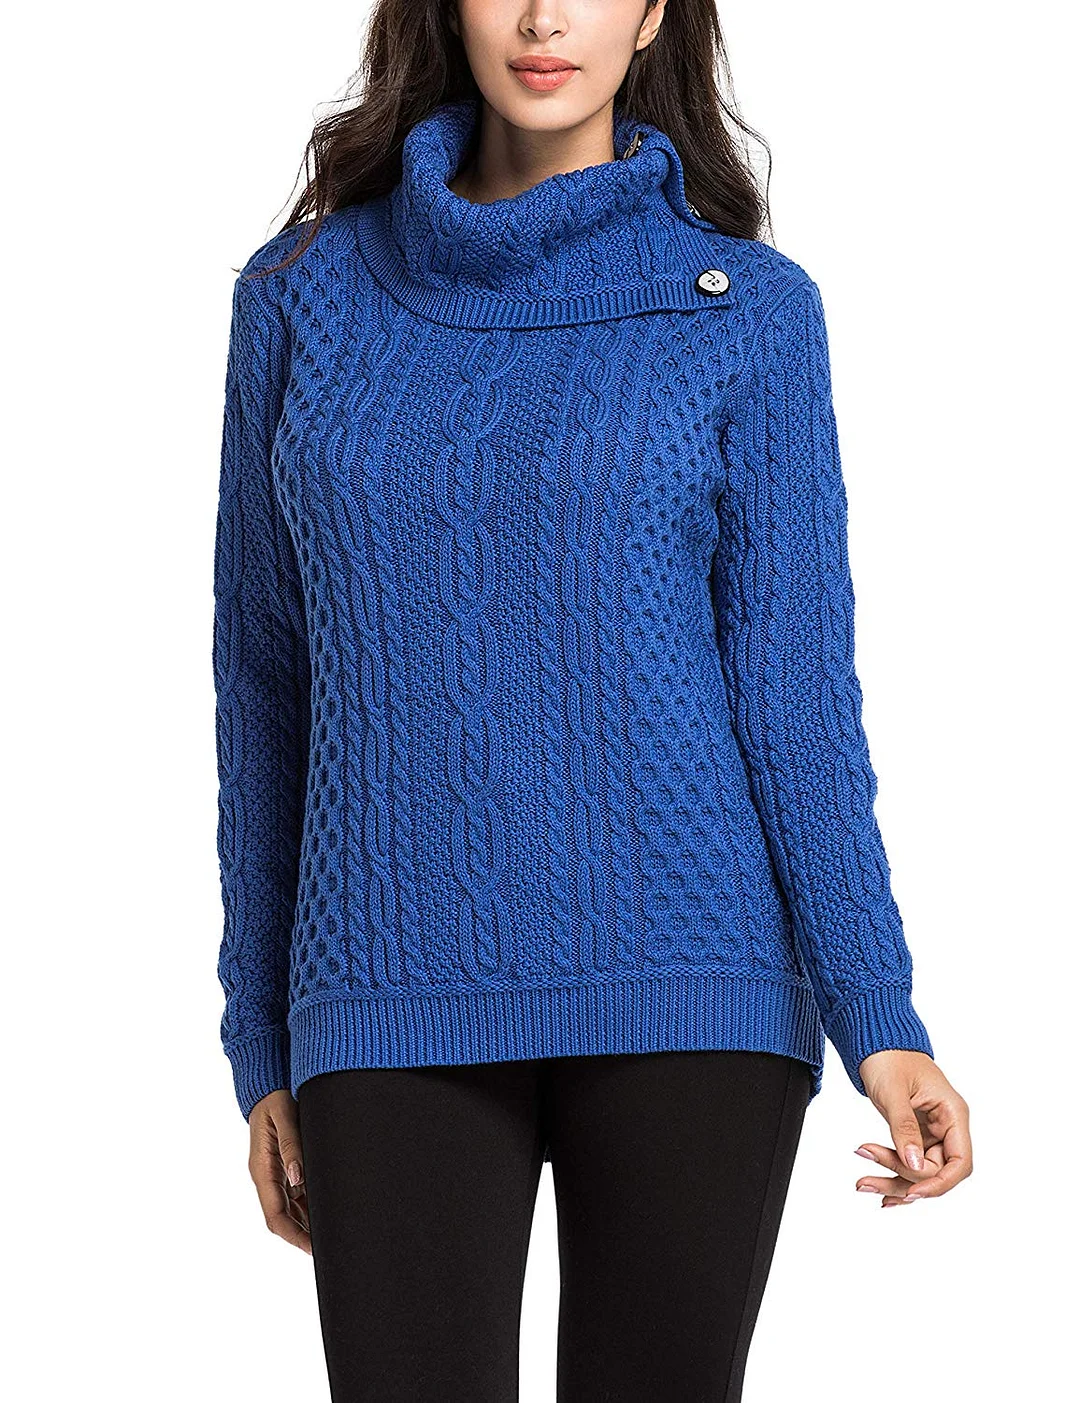 Women's Turtleneck Sweater Cable Knit Button Tunic Pullover Tops